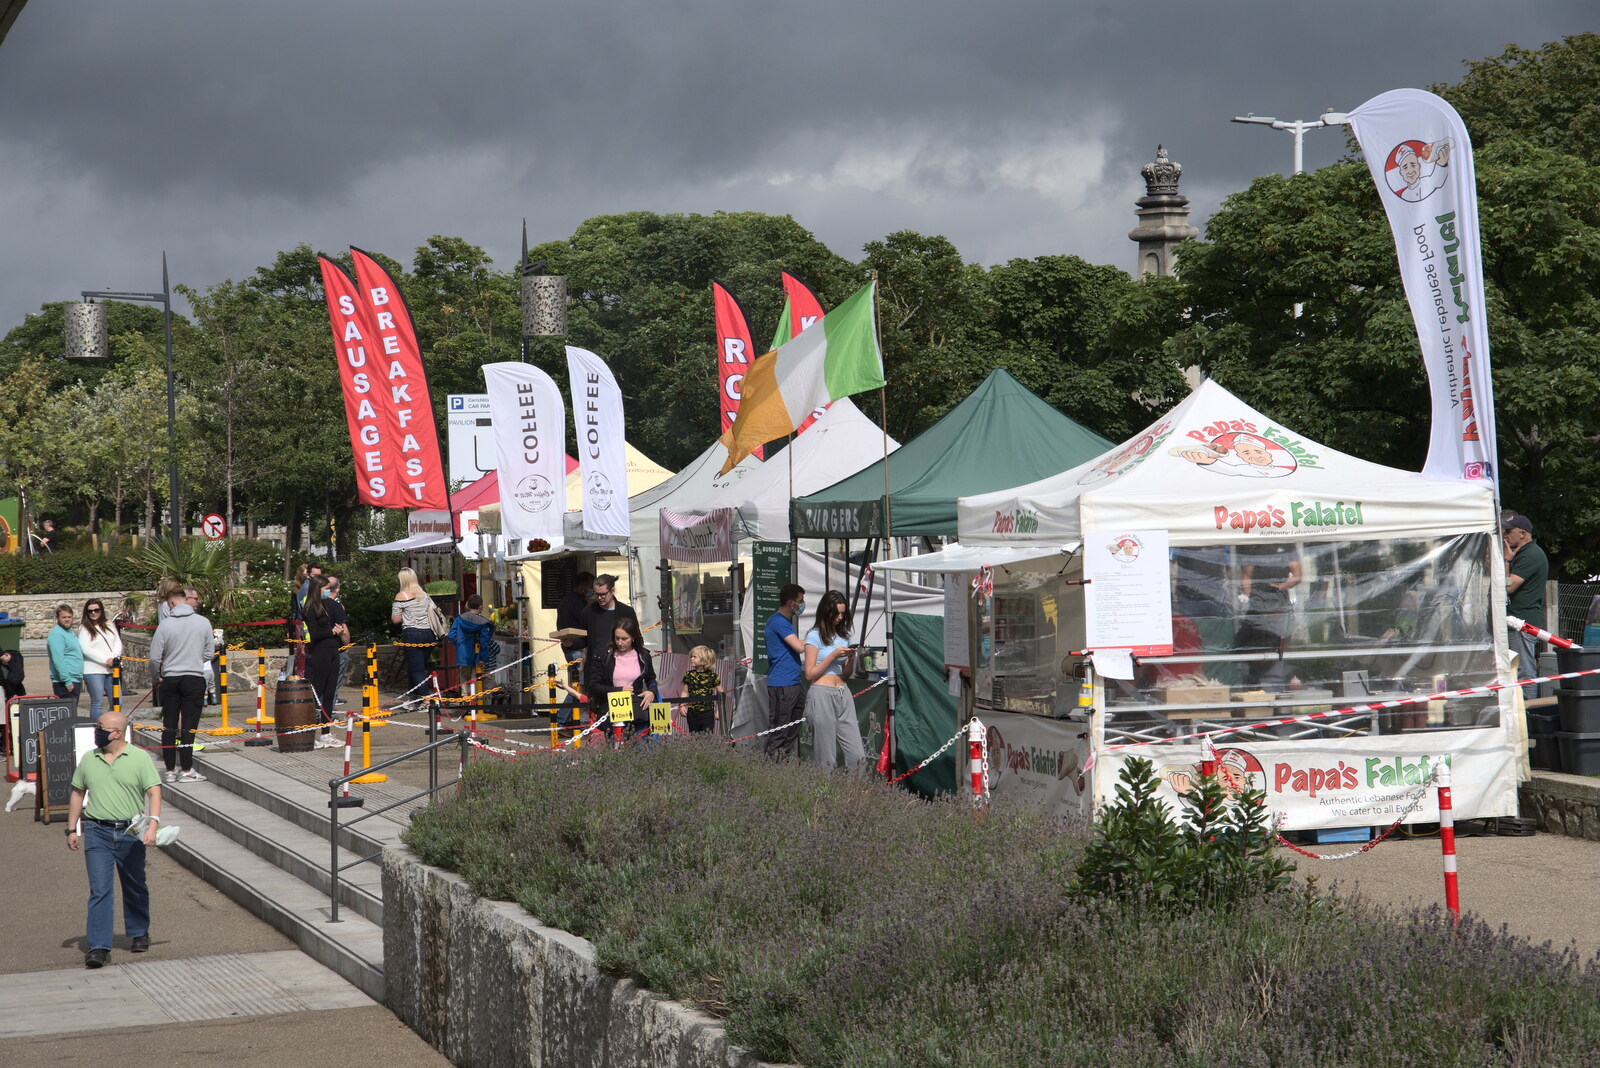 A street food market on Queen's Road from Manorhamilton and the Street Art of Dún Laoghaire, Ireland - 15th August 2021